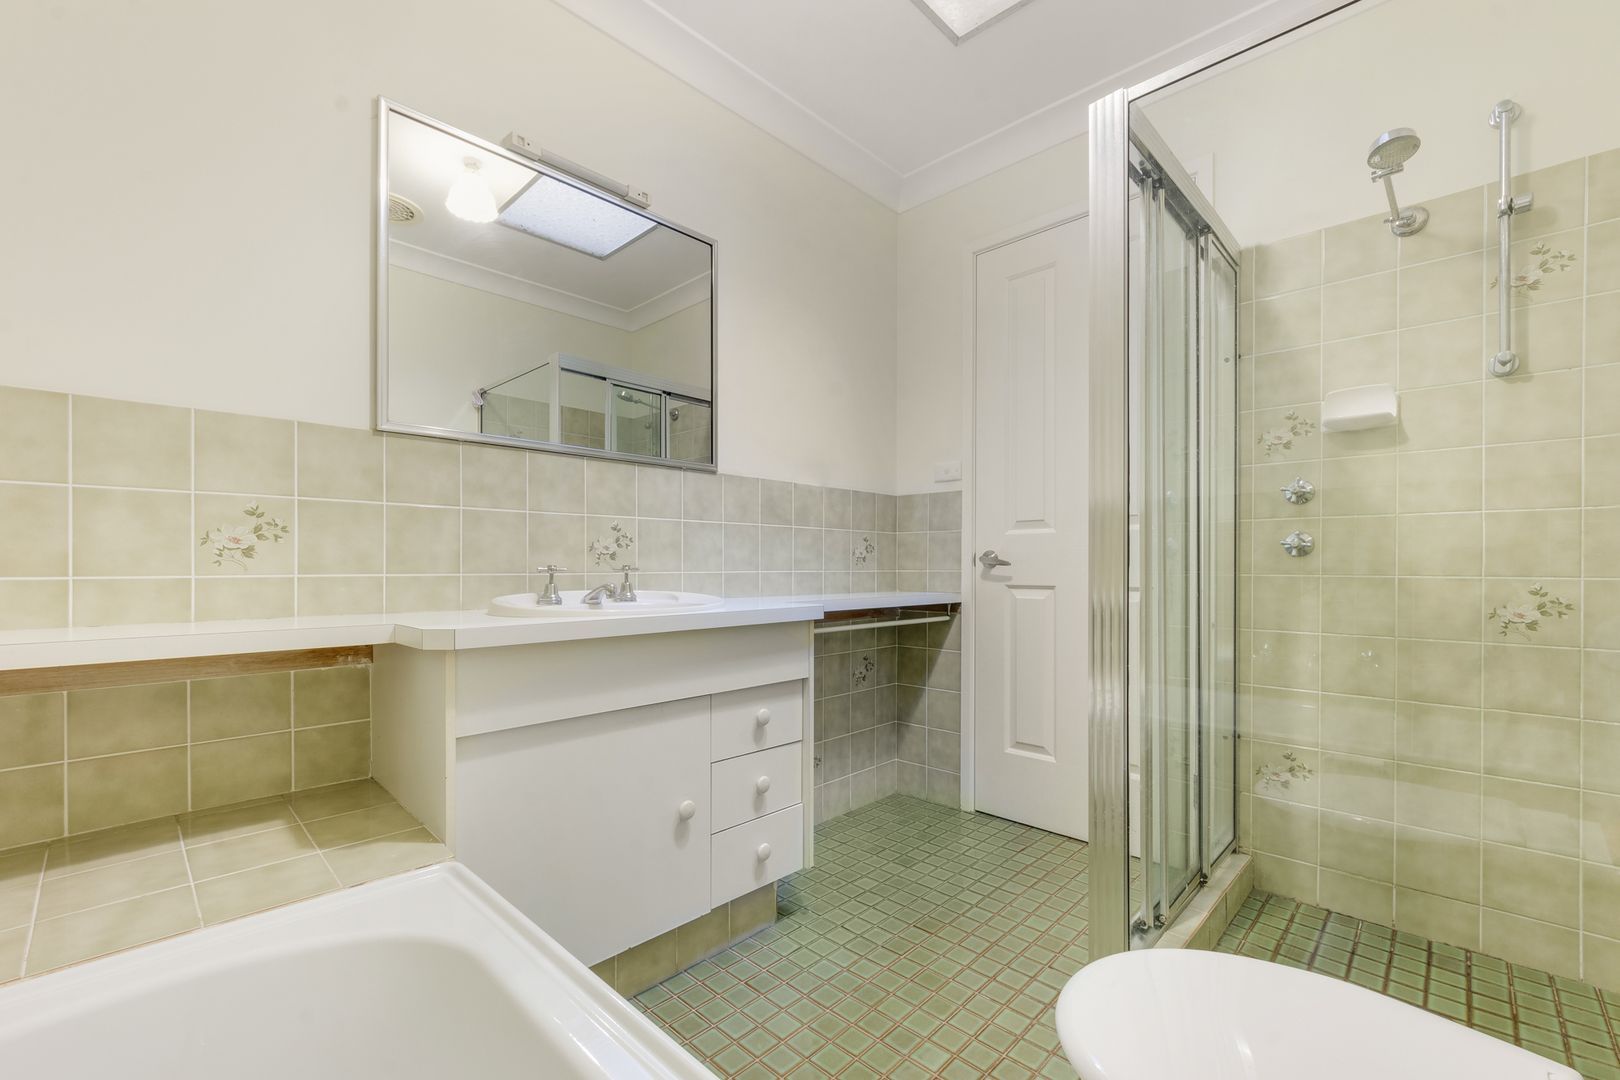 5/13 Reddall St, Campbelltown NSW 2560, Image 1